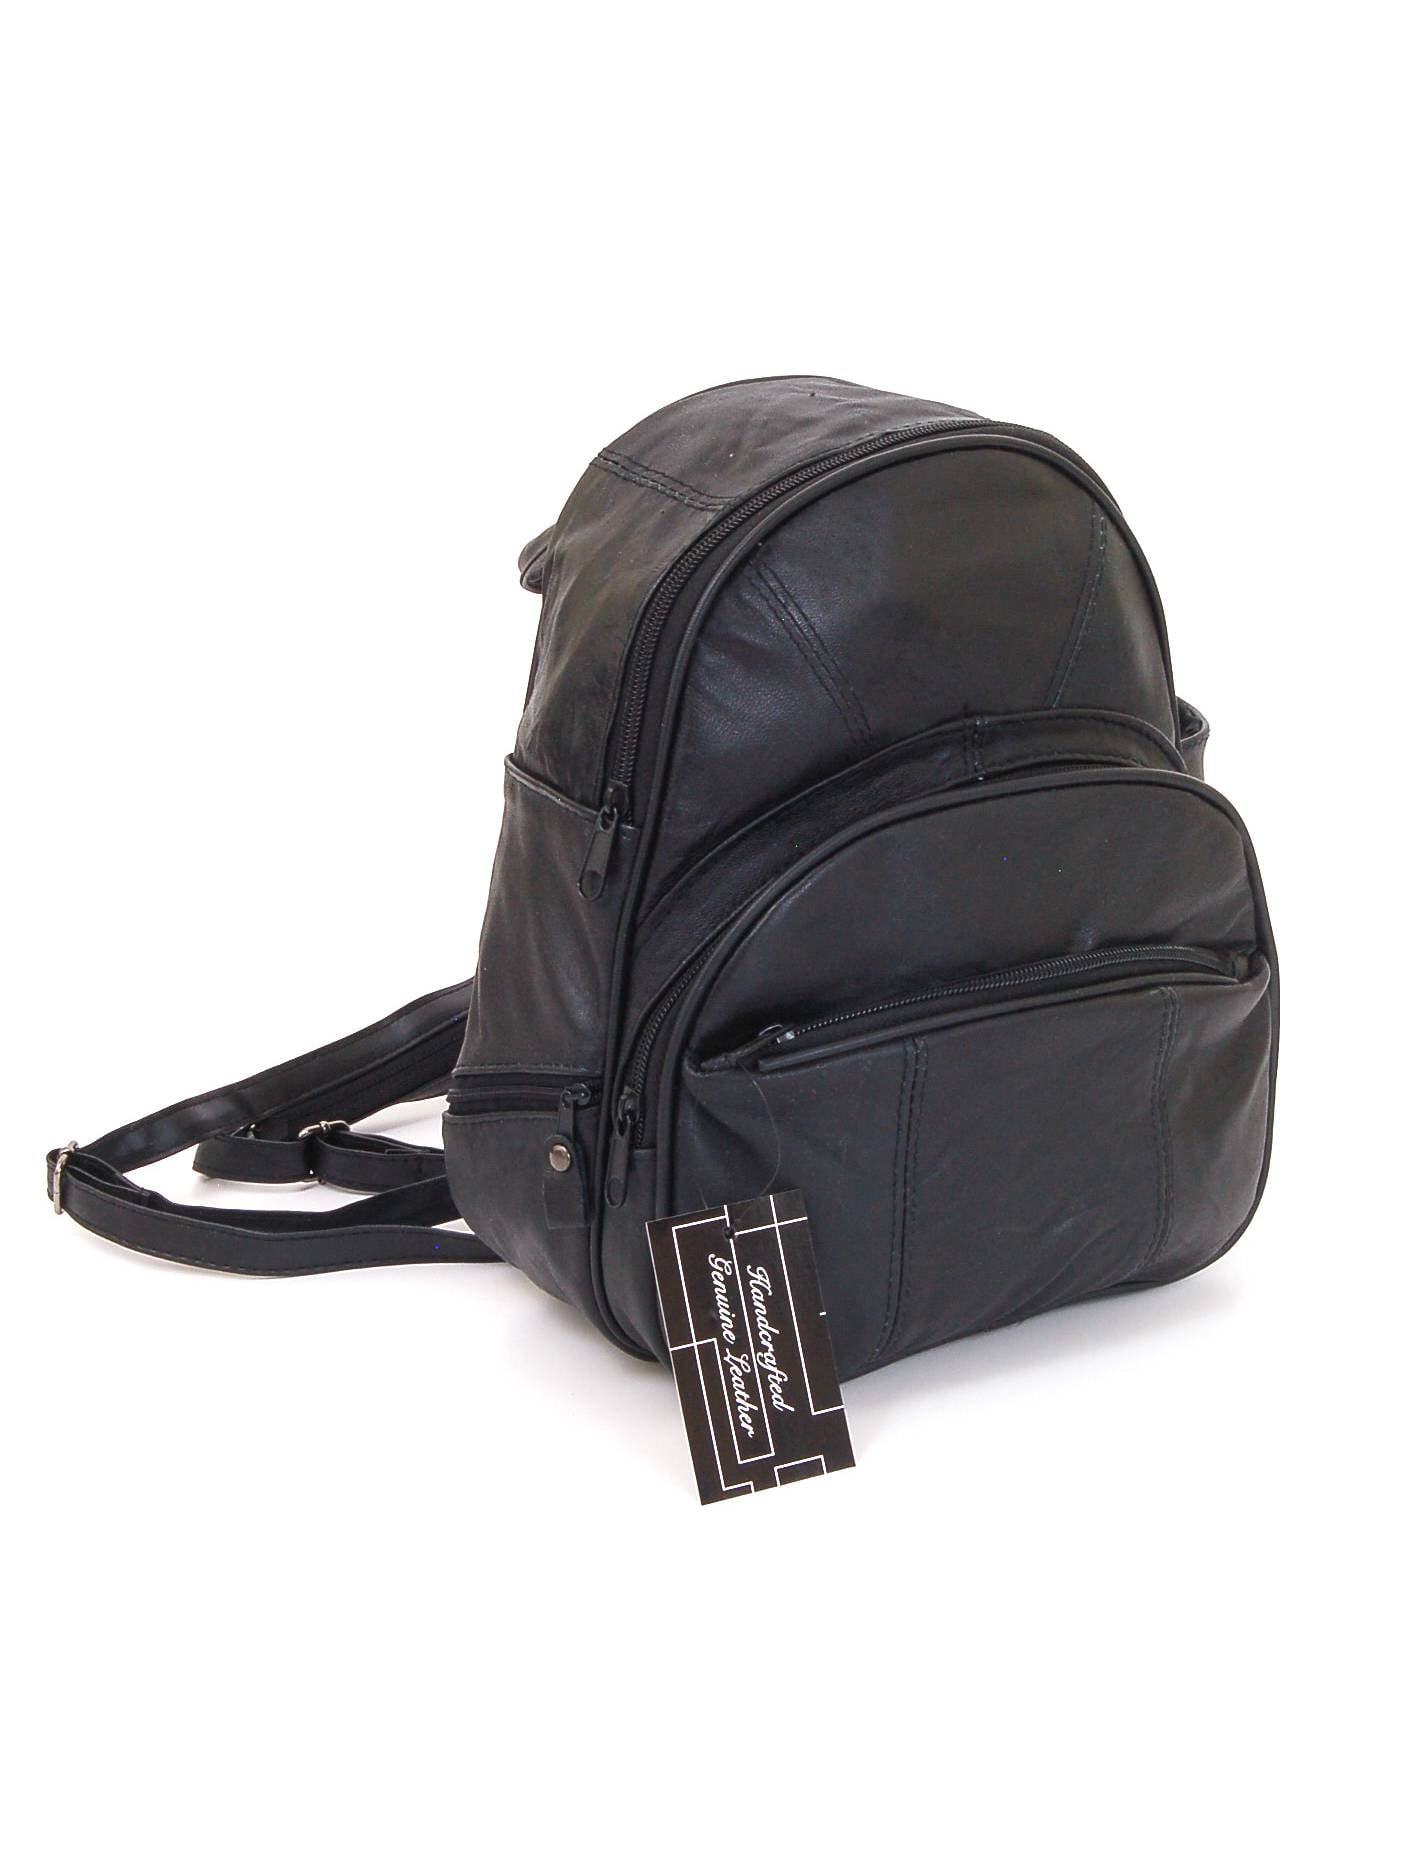 The Knuckle | Women's Leather Backpack Purse – The Real Leather Company